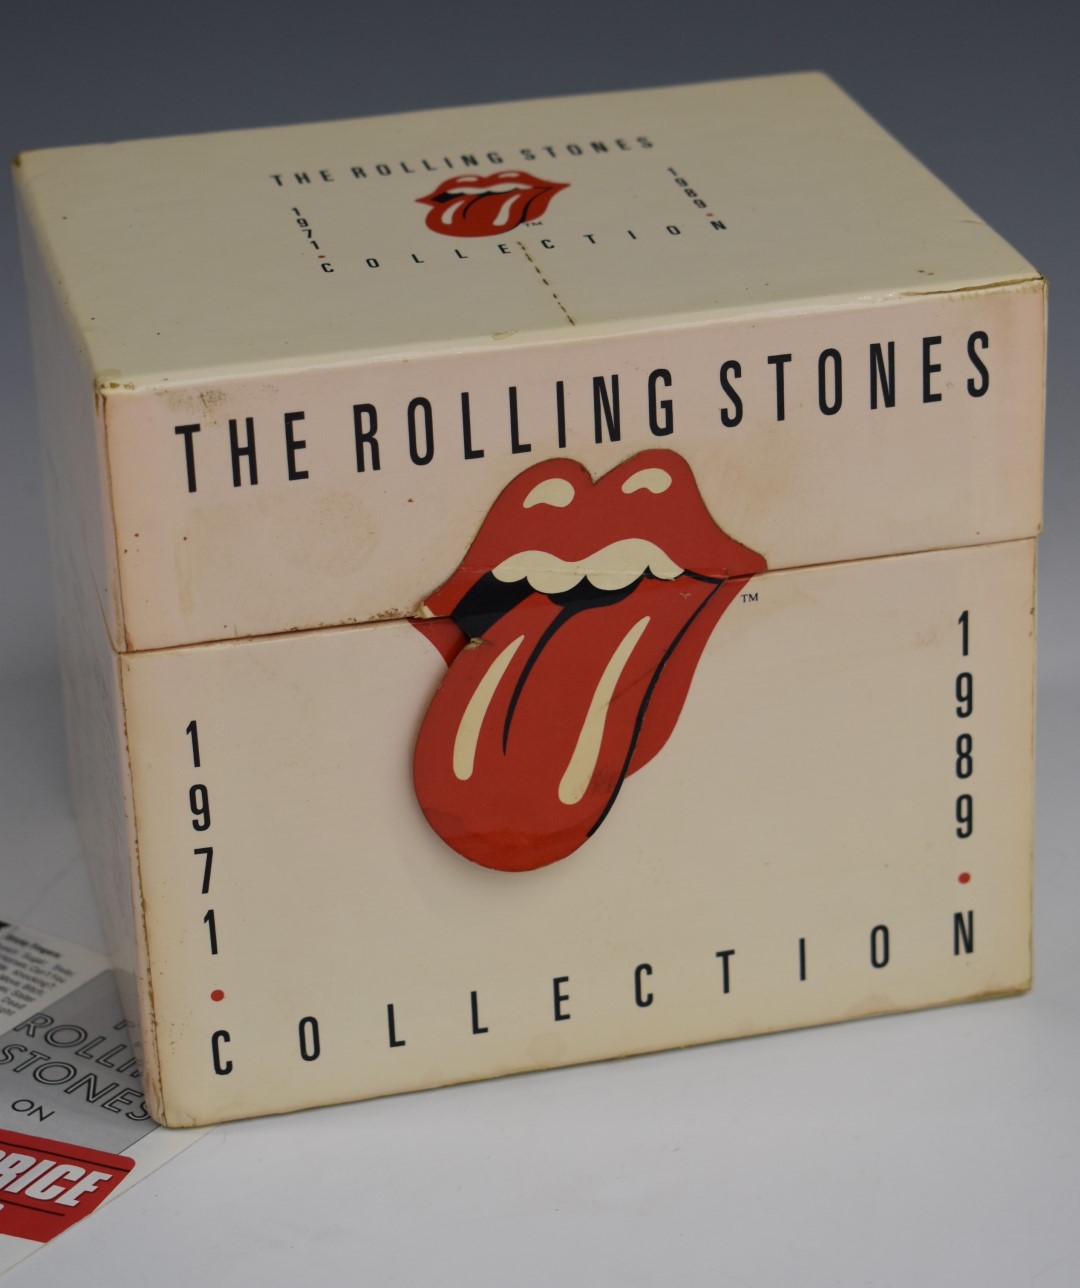 The Rolling Stones - Collection 1971-1989 (4669182) CD box set. CDs etc appear EX with wear/ageing - Image 2 of 5